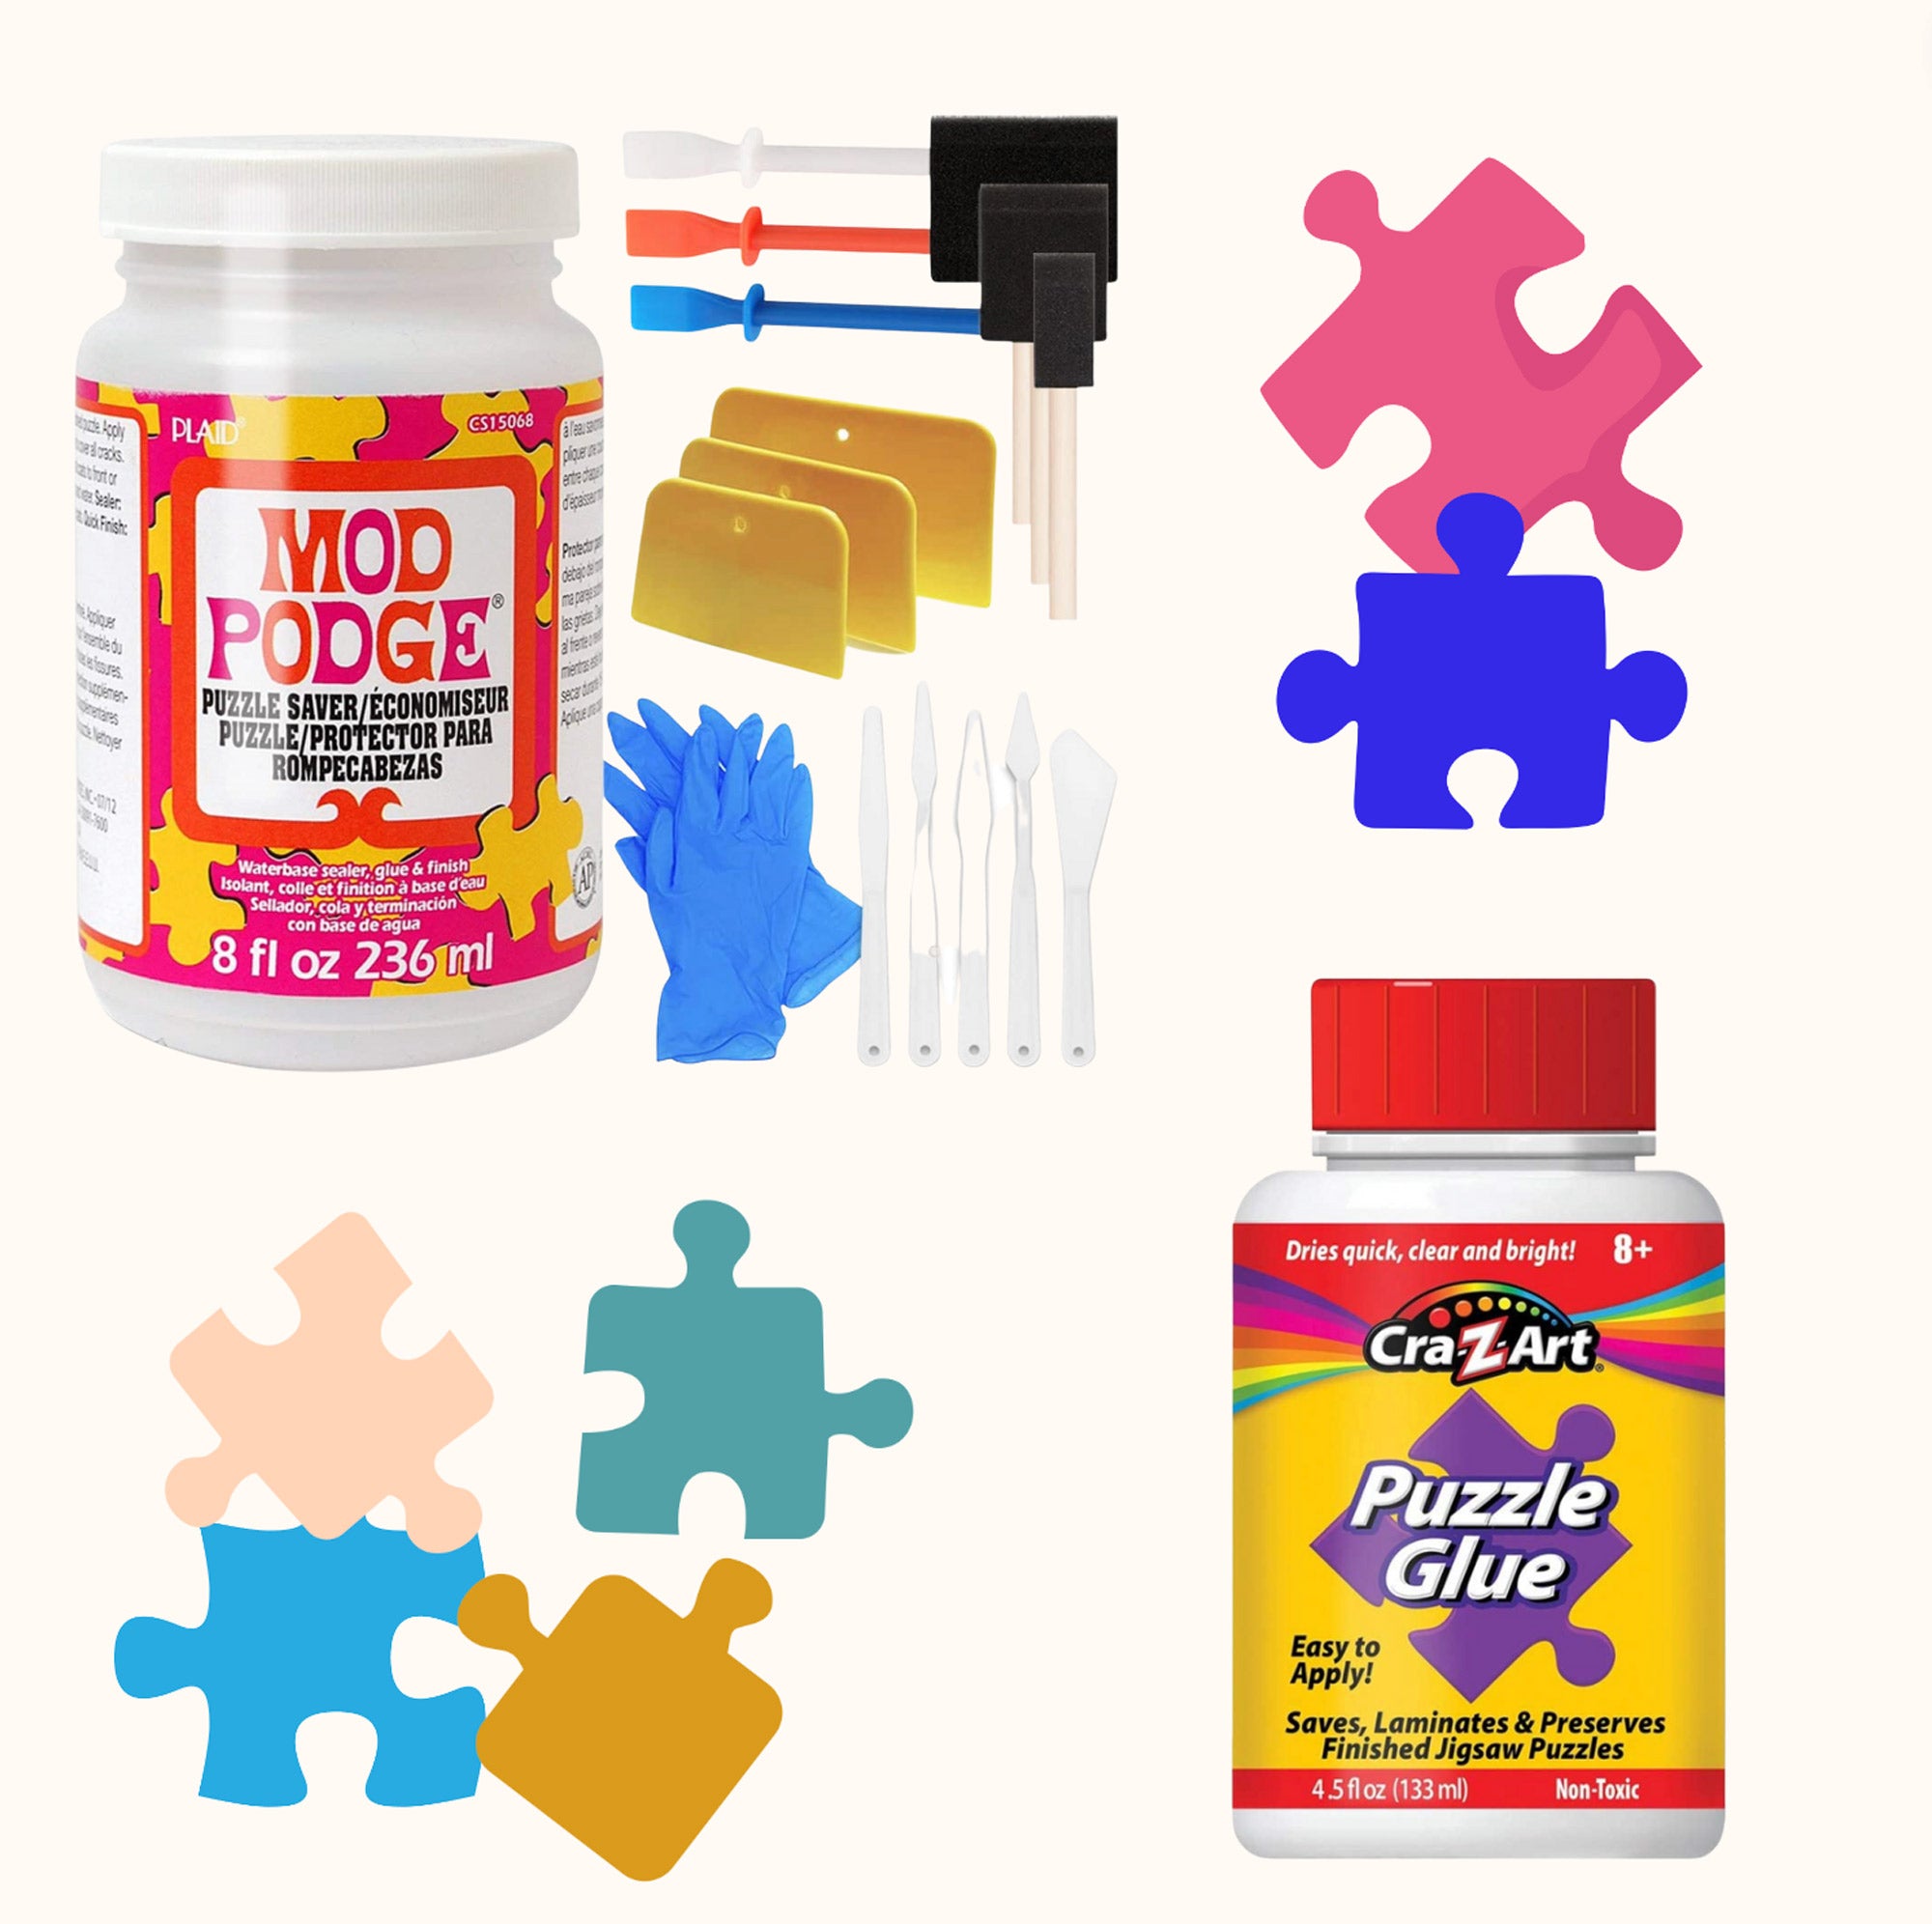 Preserve Your Puzzle with Mod Podge Puzzle Saver